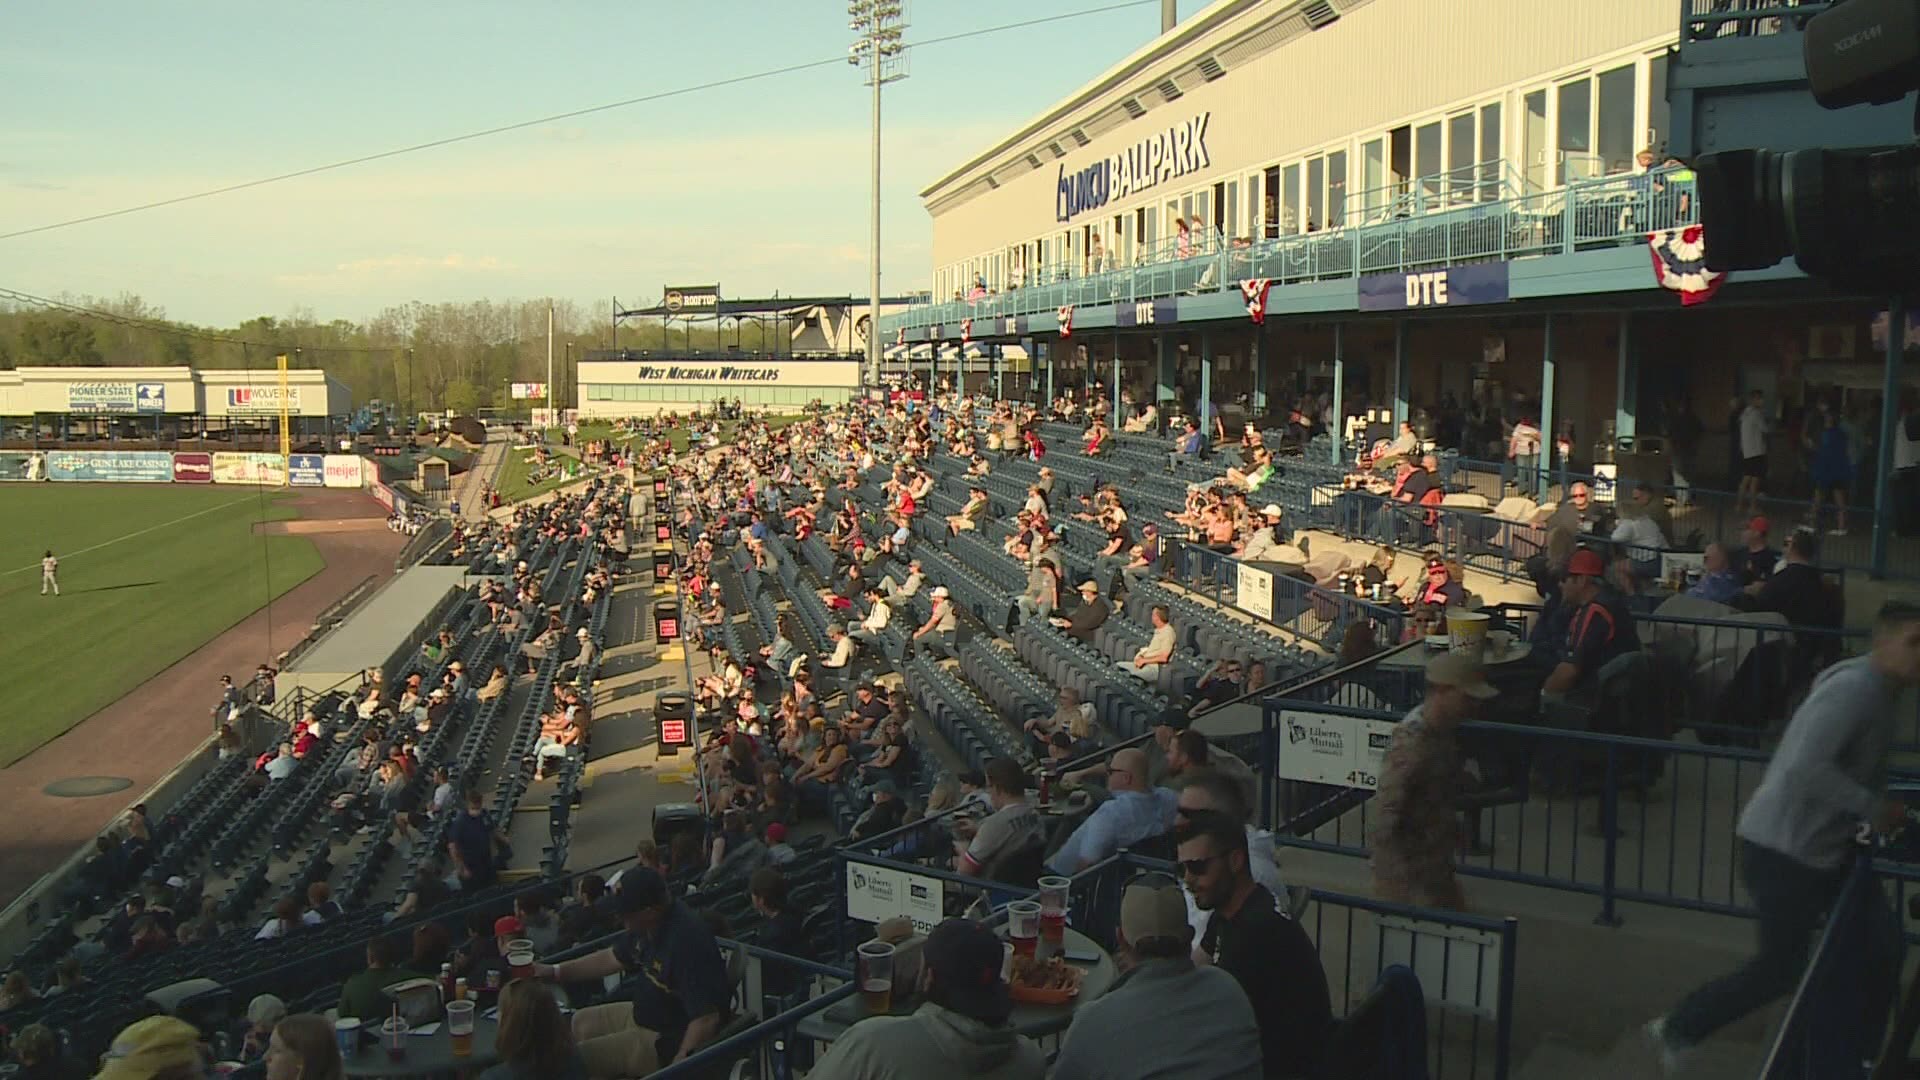 The Whitecaps are expecting about 3,000 fans for tonight's game against Lansing.